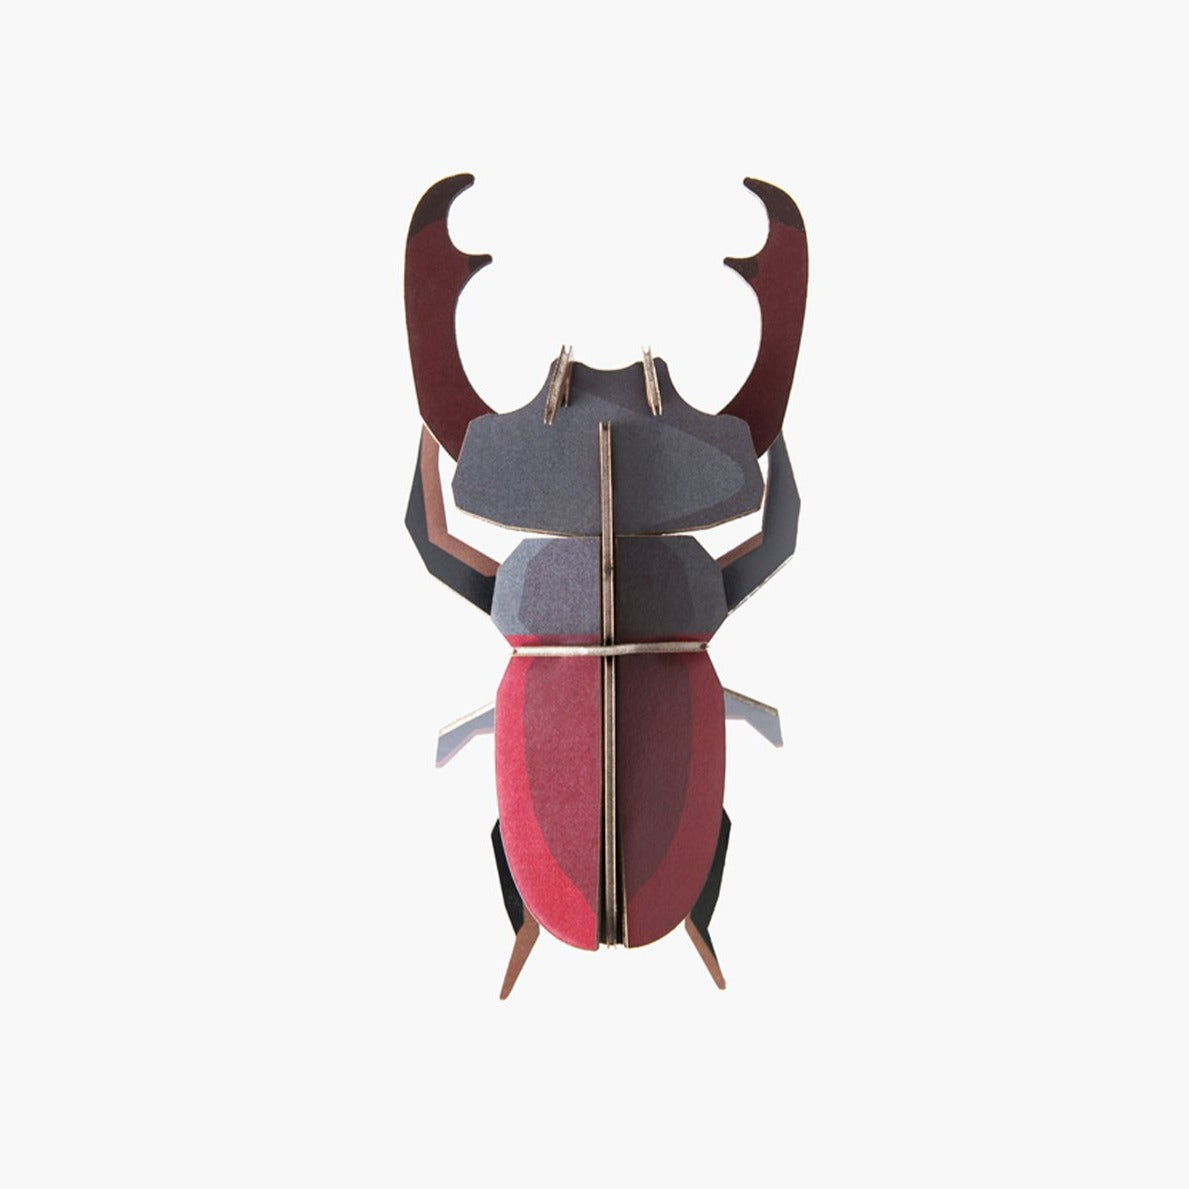 Studio Roof 3D Model Wall Decor - Stag Beetle